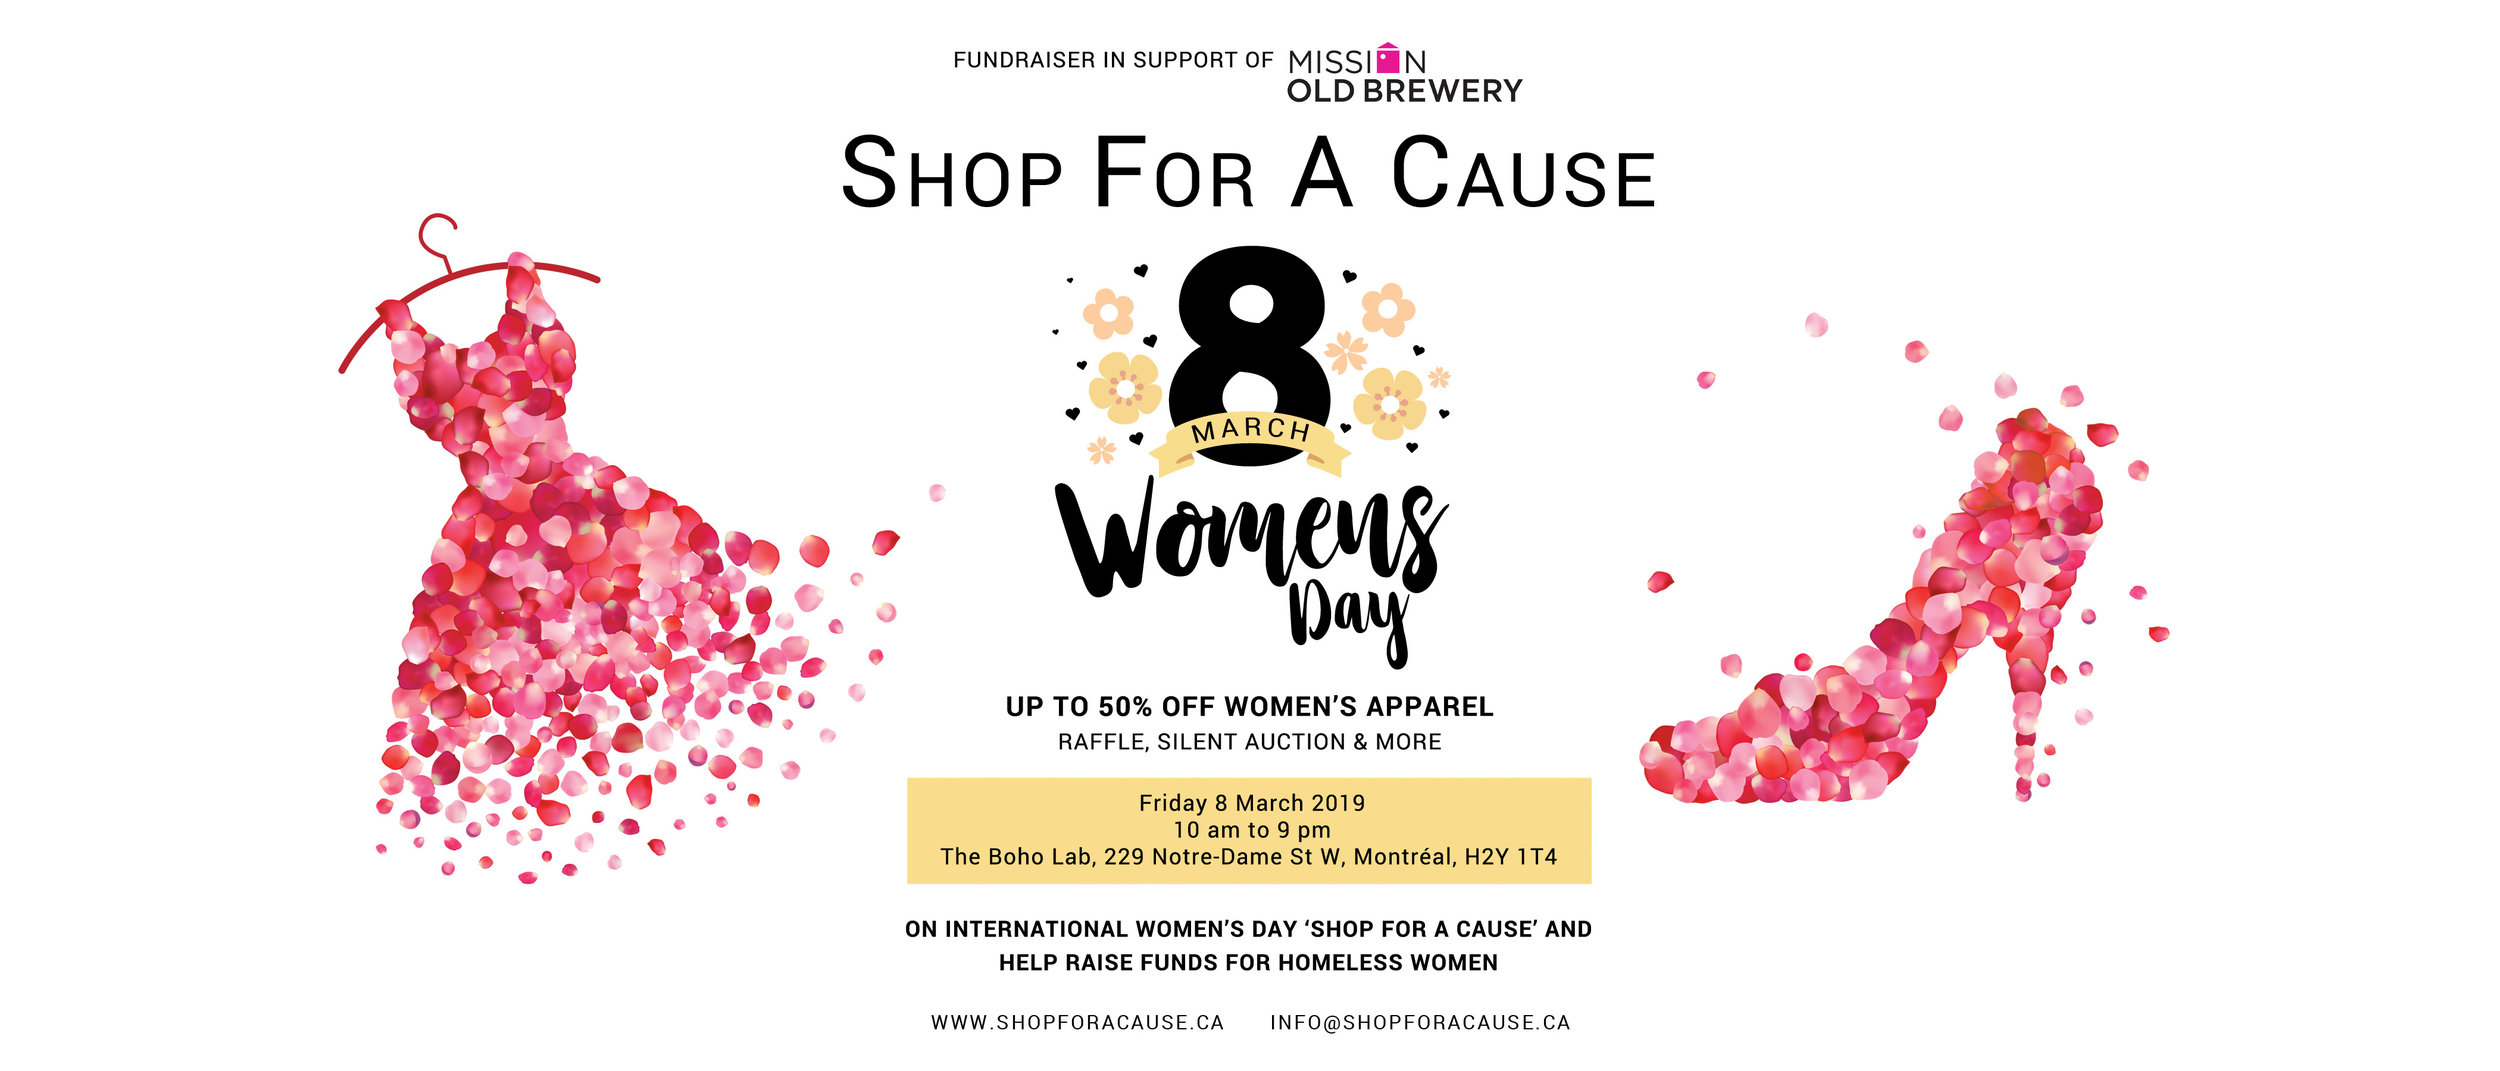 shop_for_a_cause_womens_day_v12_front.jpg